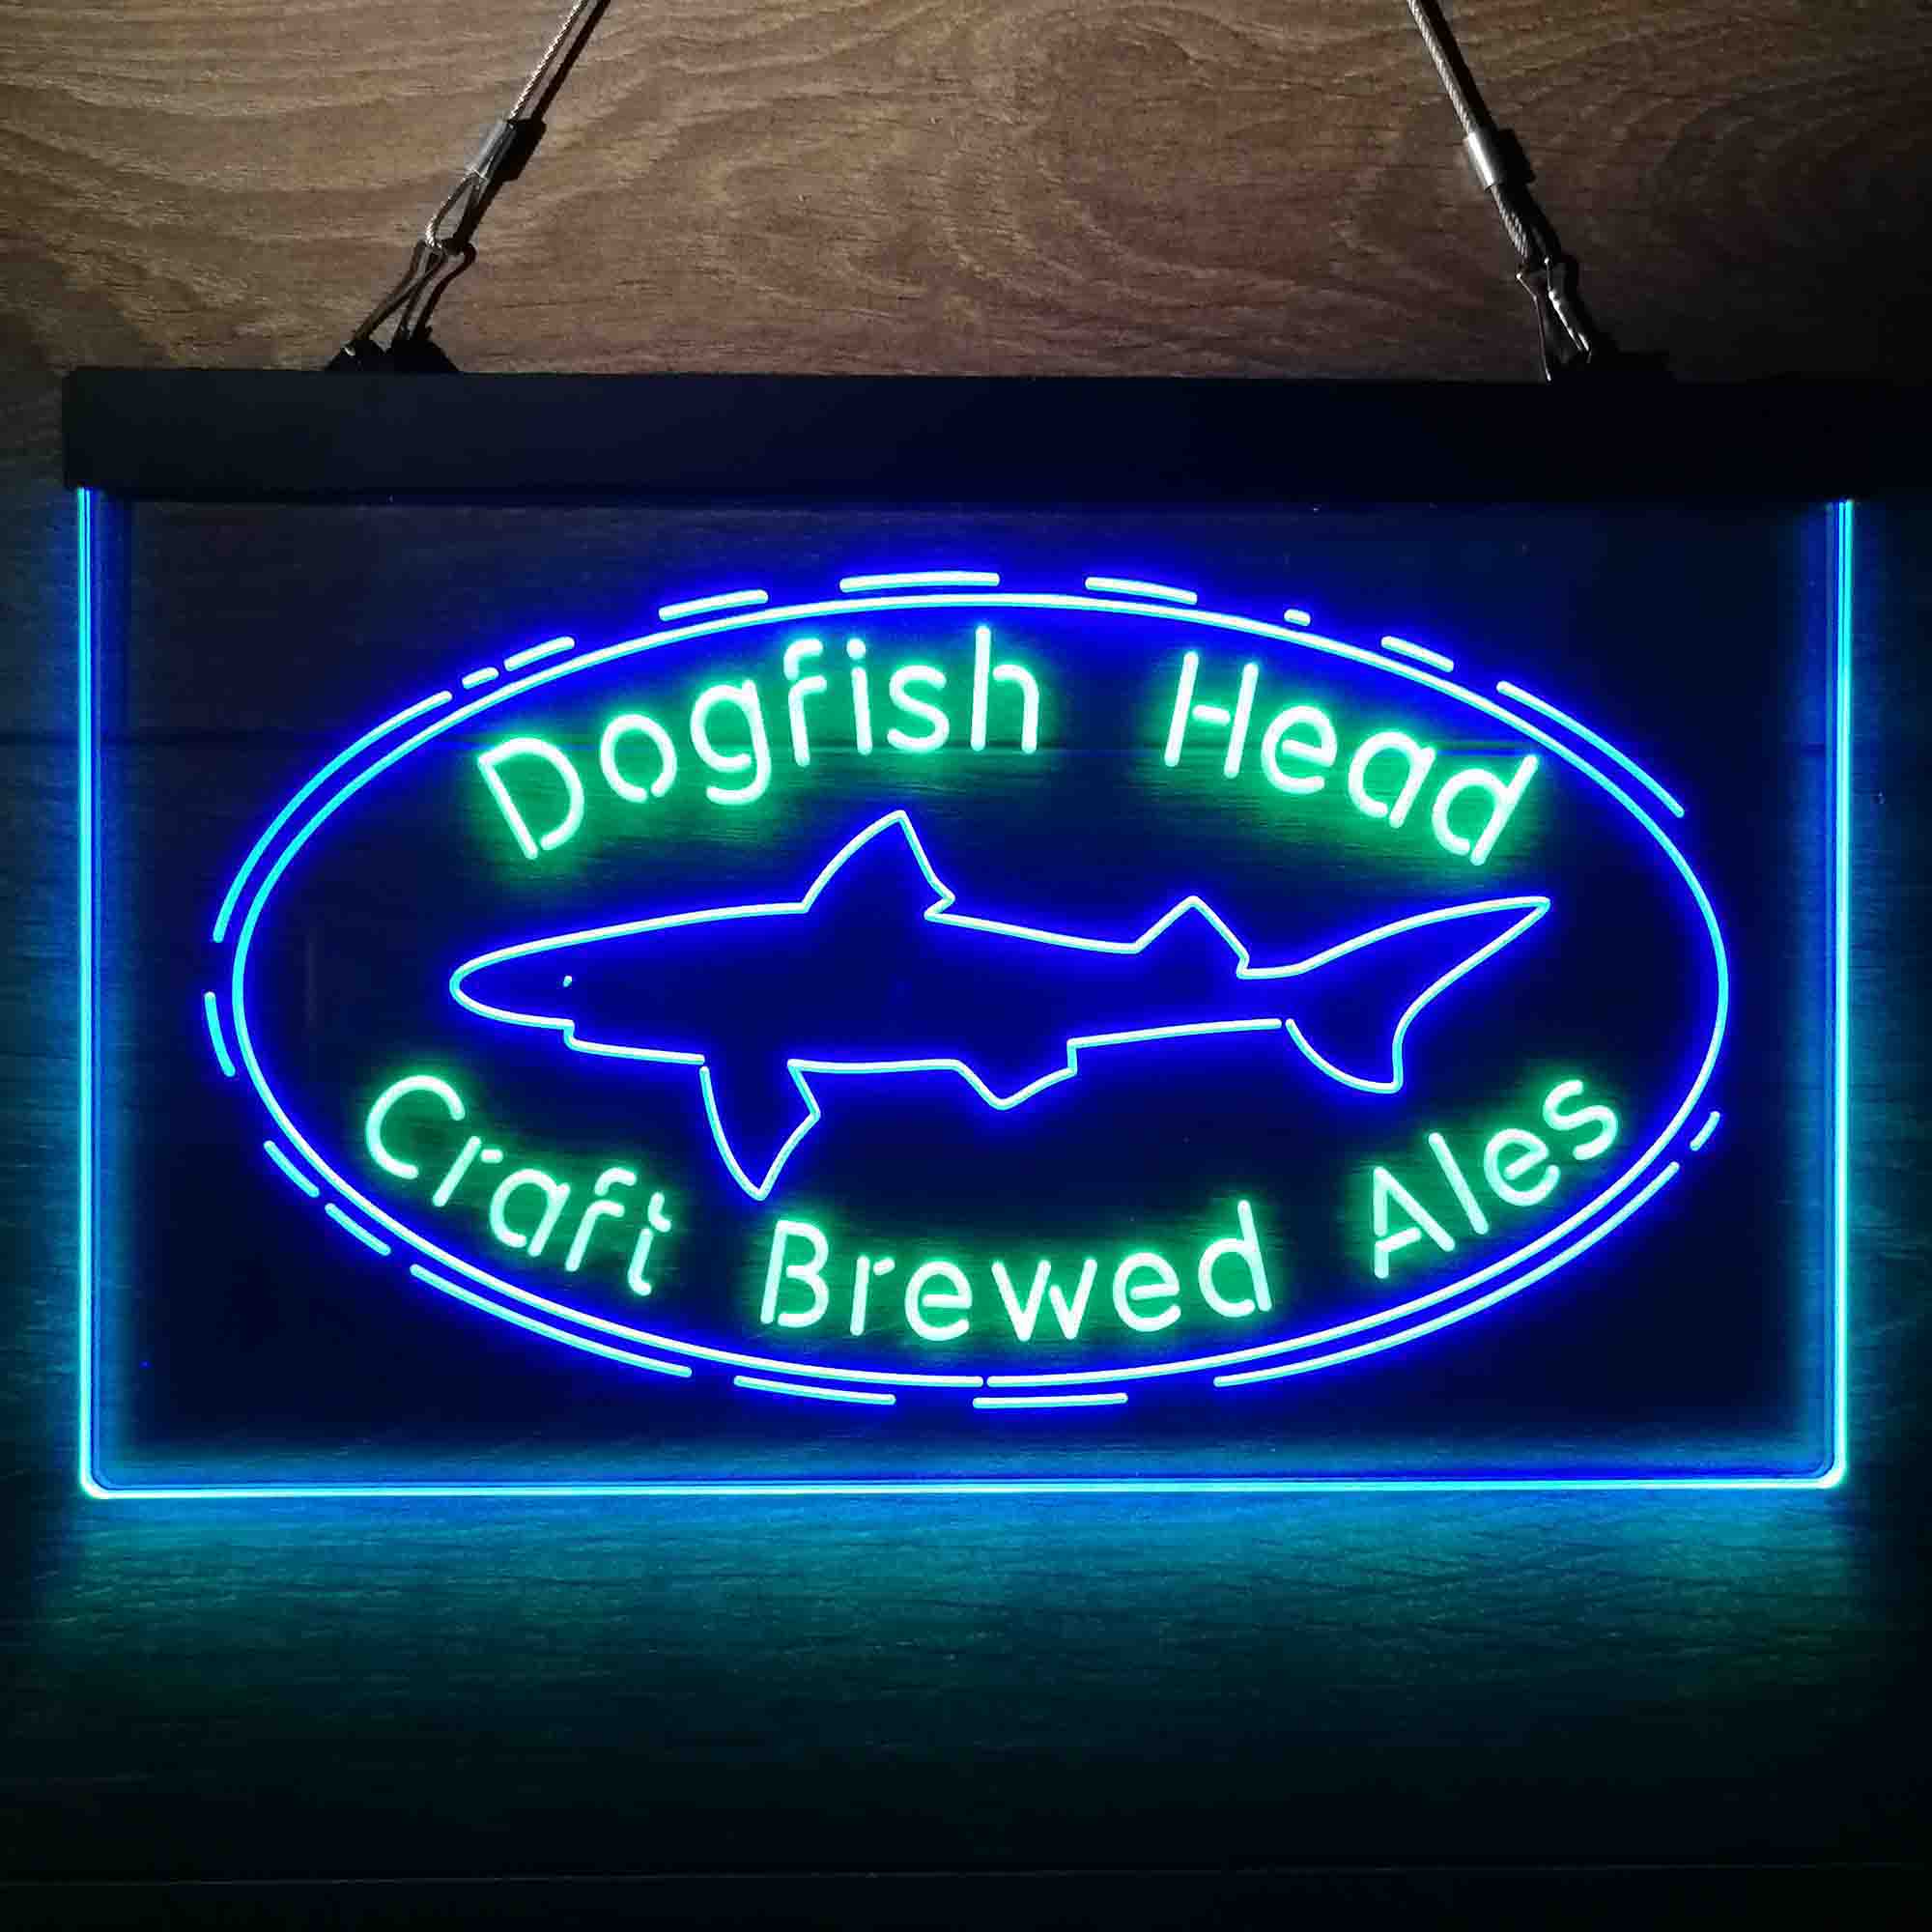 Dogfish Head Craft Brewed Ales Neon LED Sign